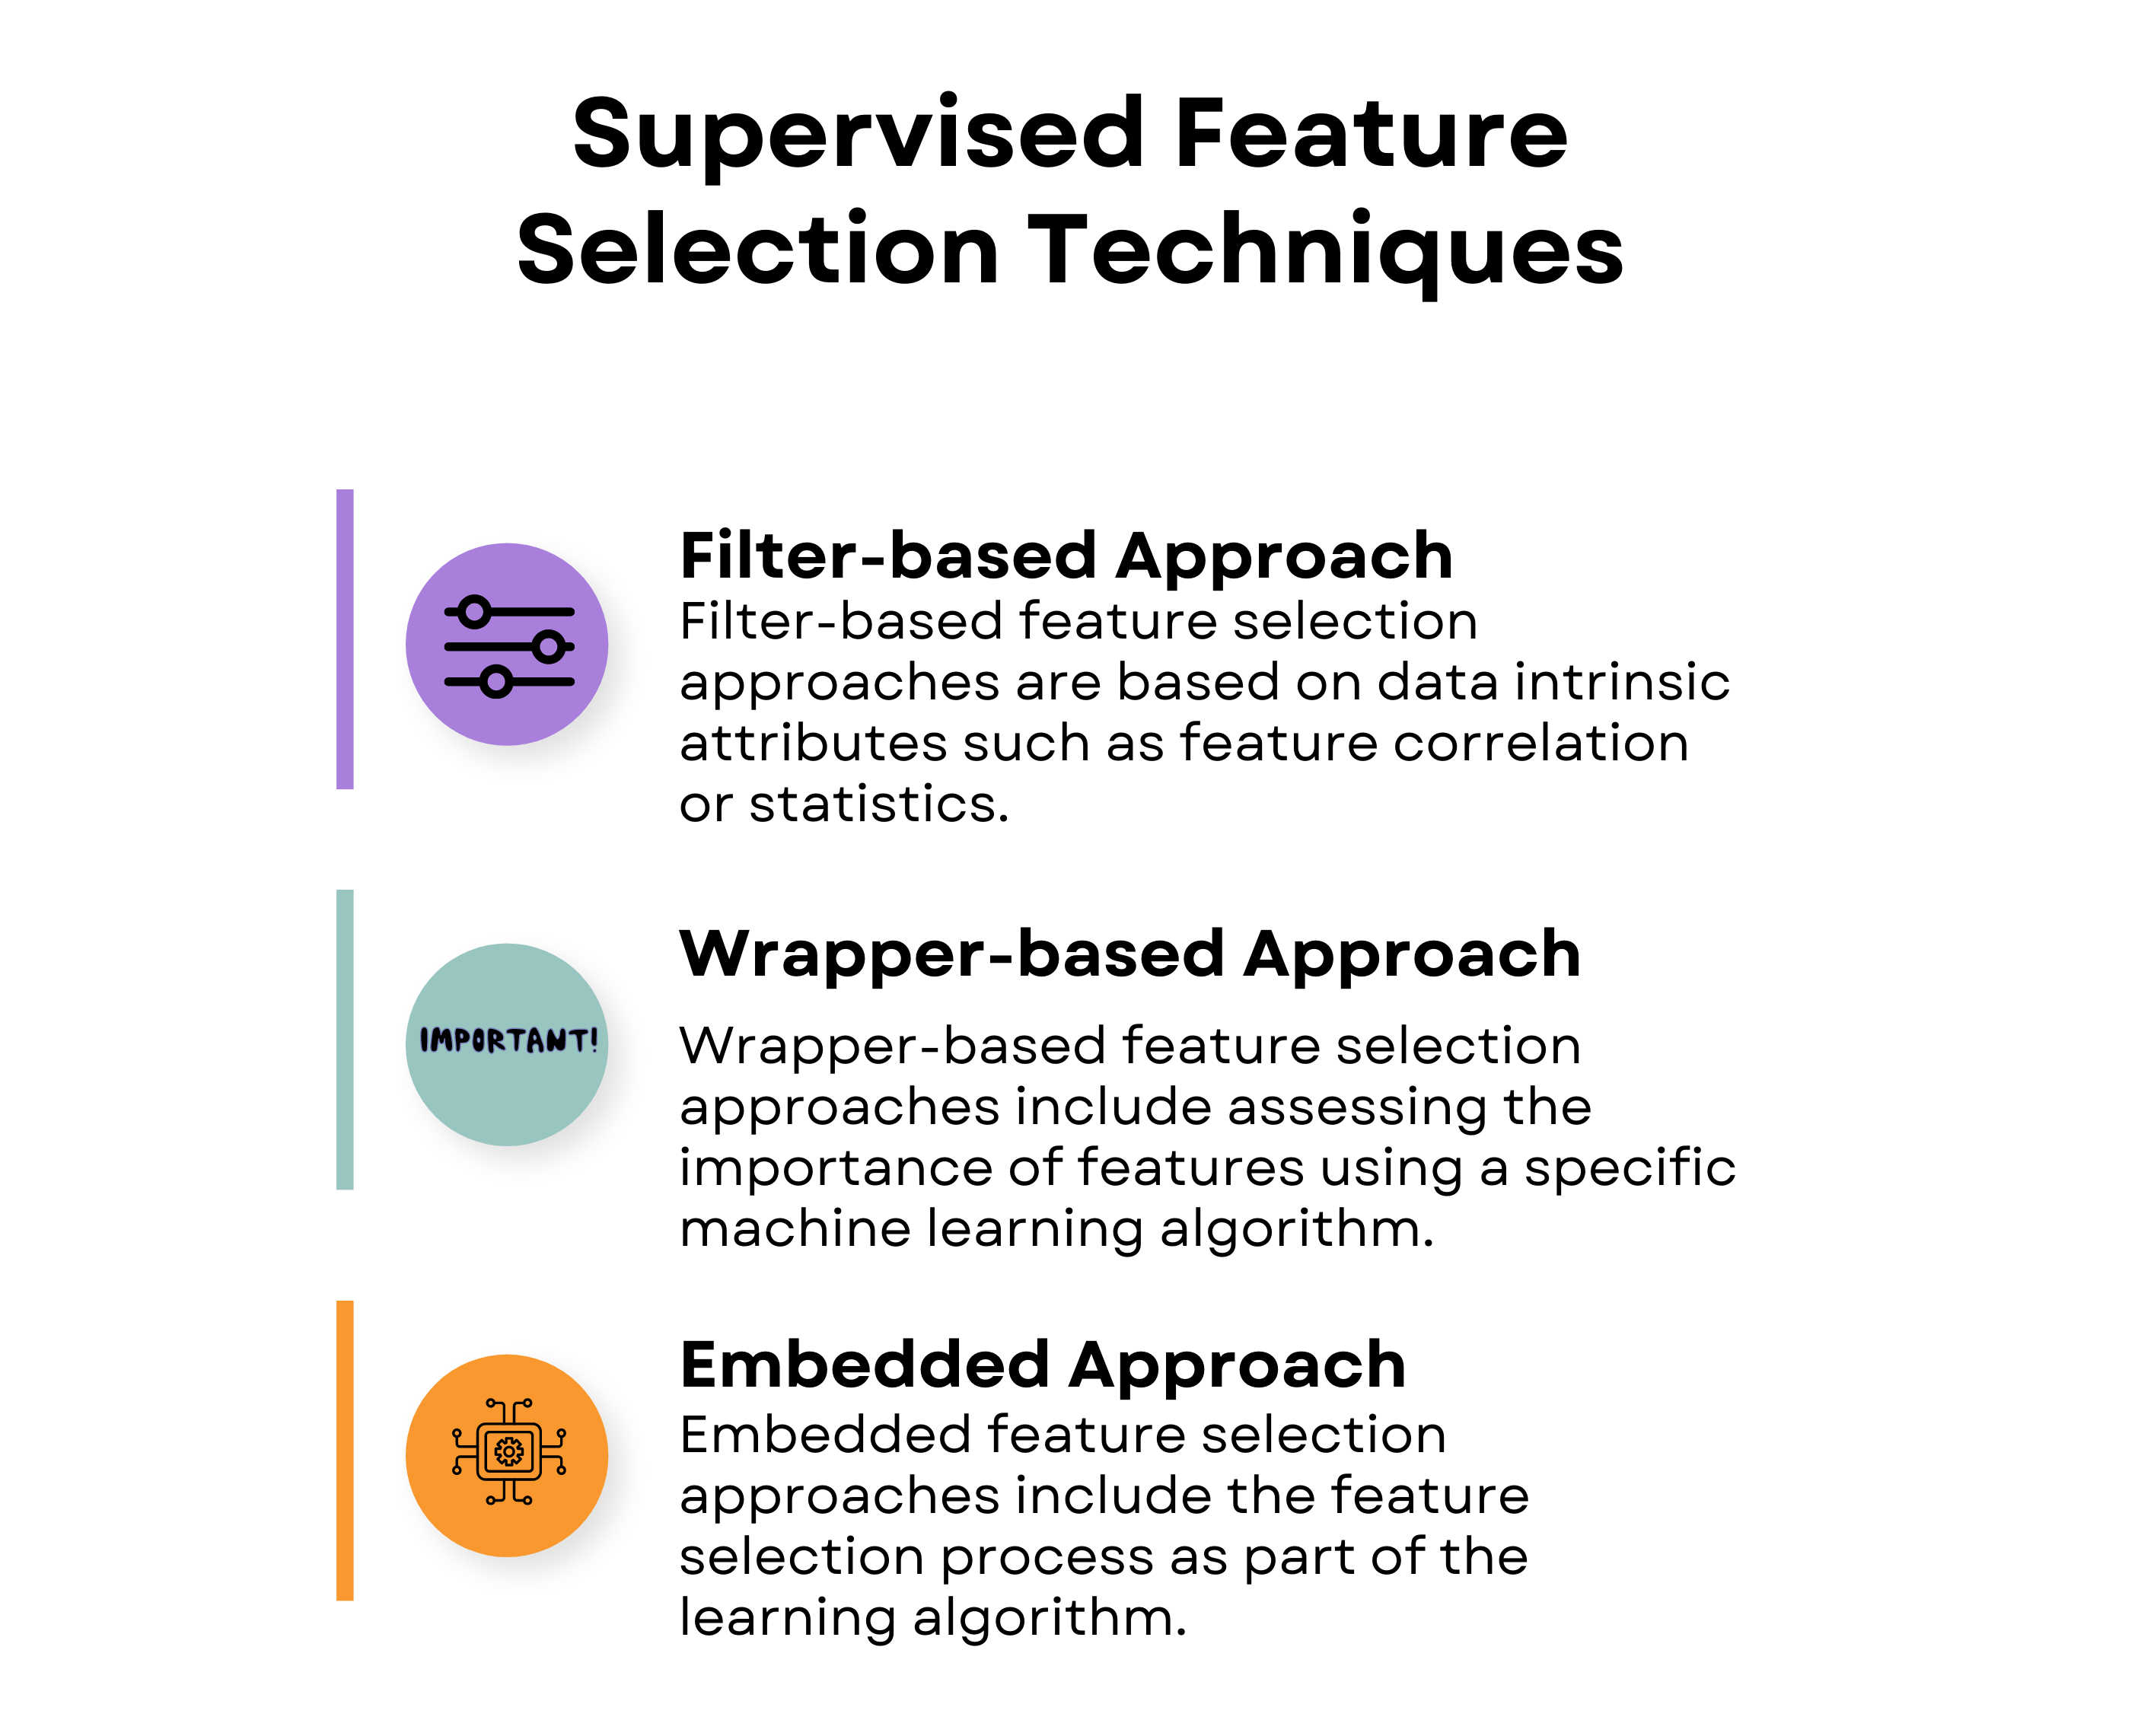 Supervised Feature Selection Techniques in Machine Learning